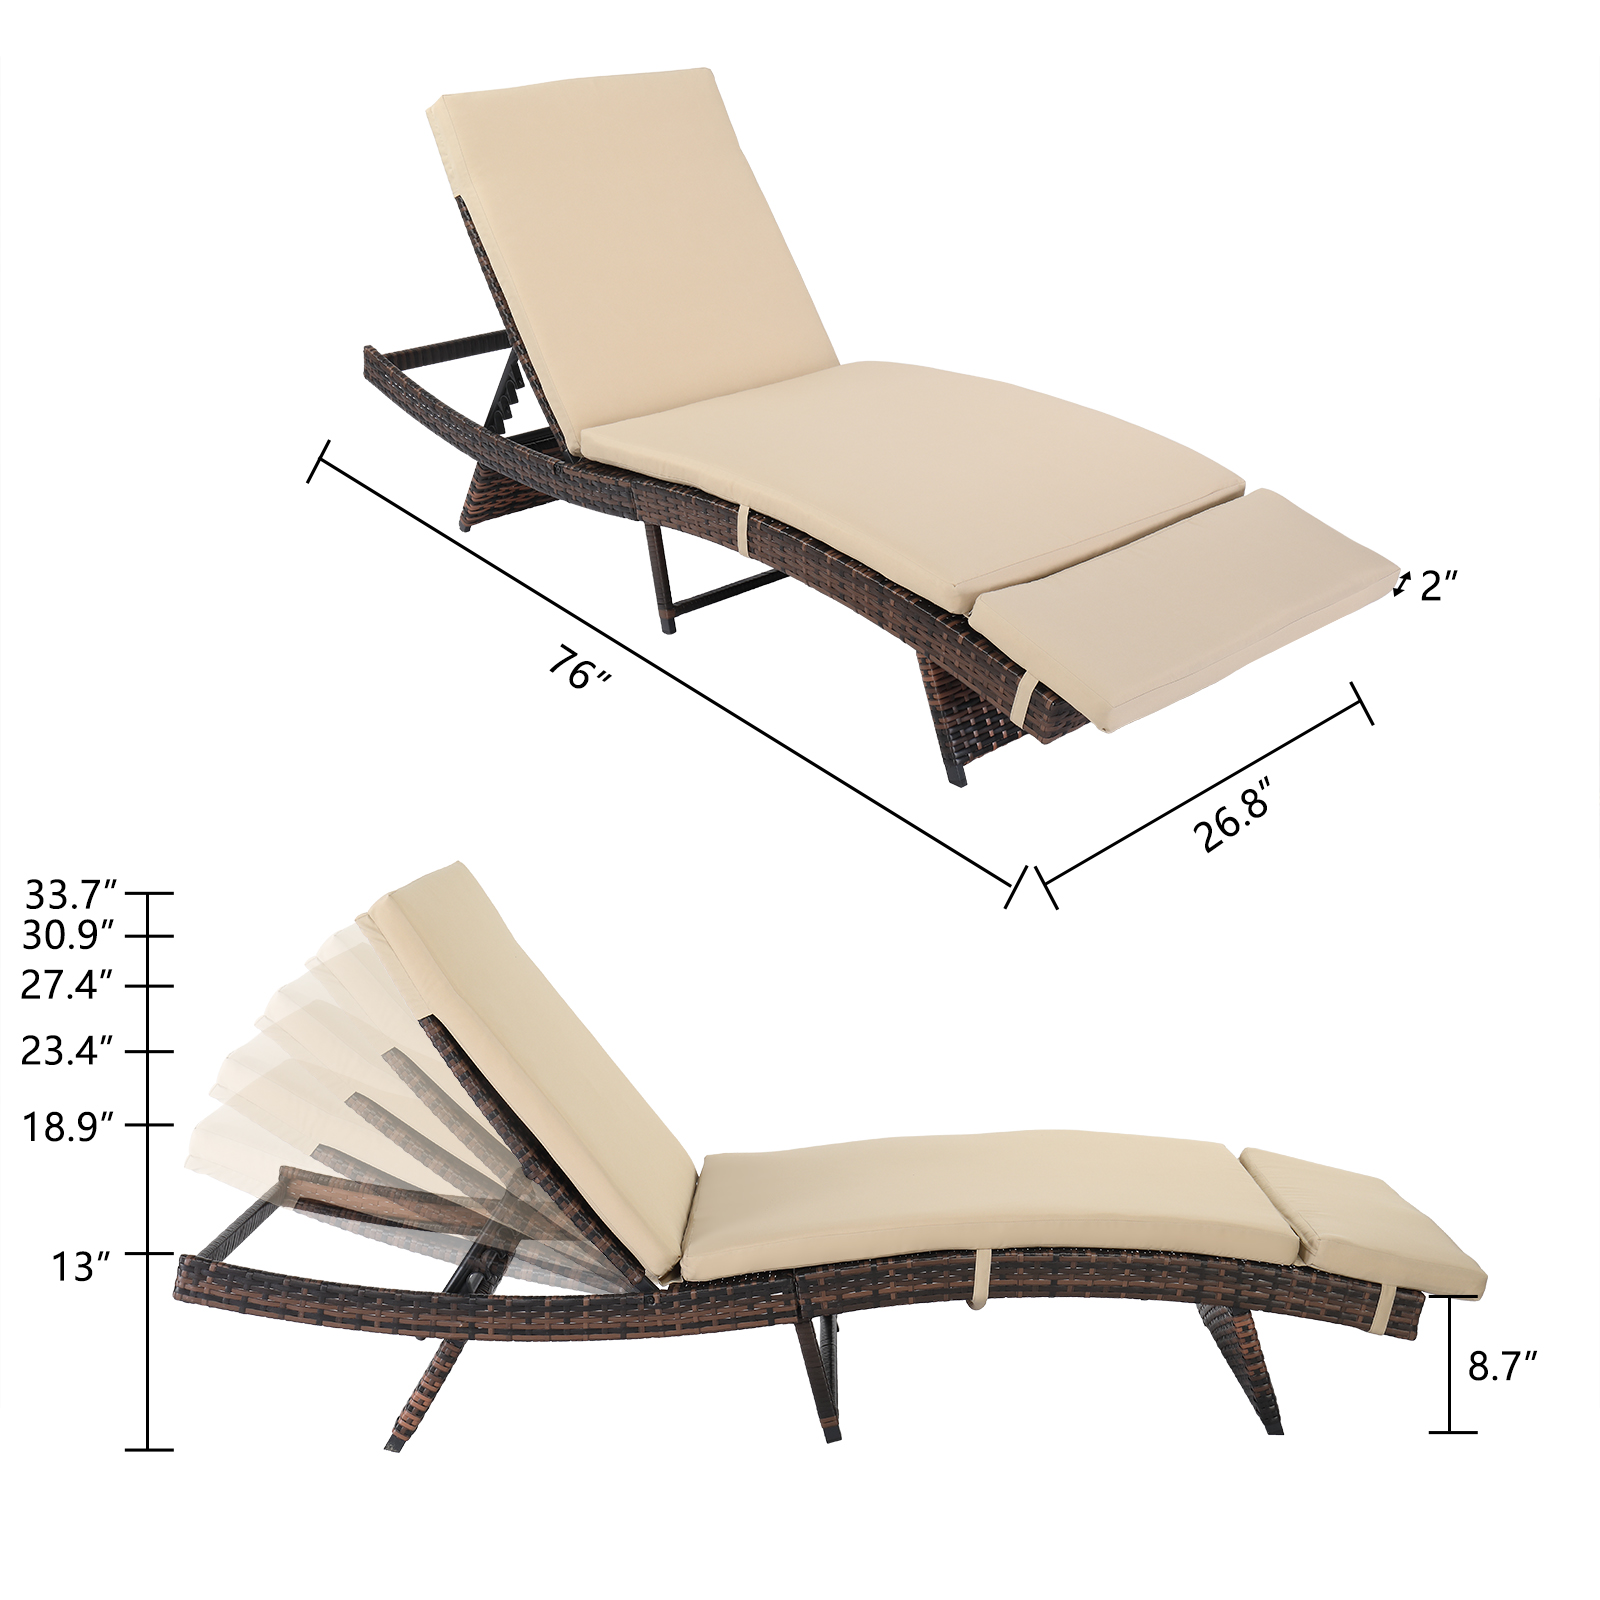 iTopRoad Products Aluminum Adjustable Chaise Lounge Chair with Cushion - image 5 of 6